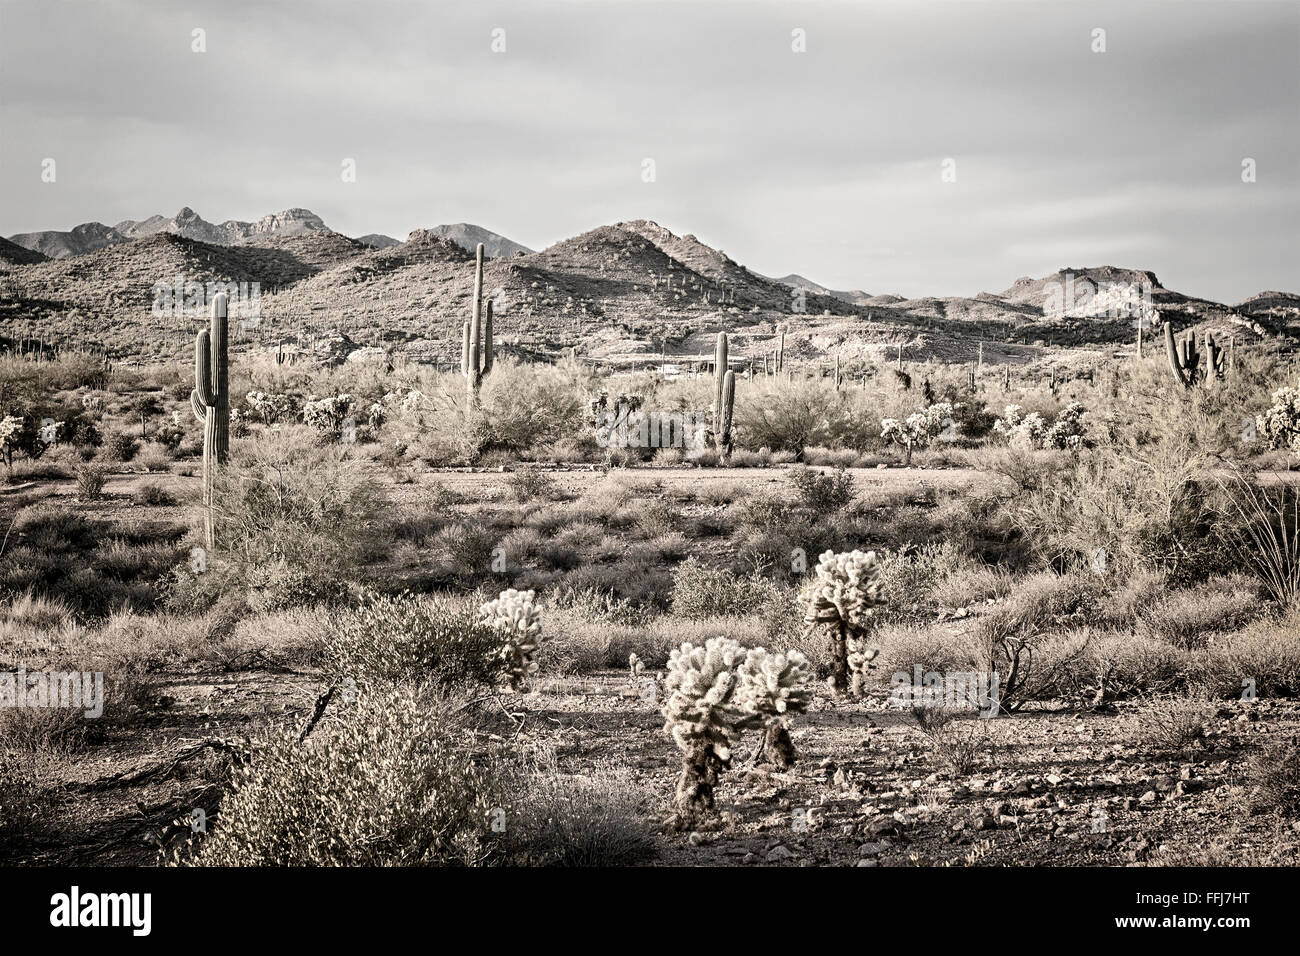 An image of the Superstition desert in Arizona shows the rugged detail of a dry wilderness with a saguaro cactus Stock Photo